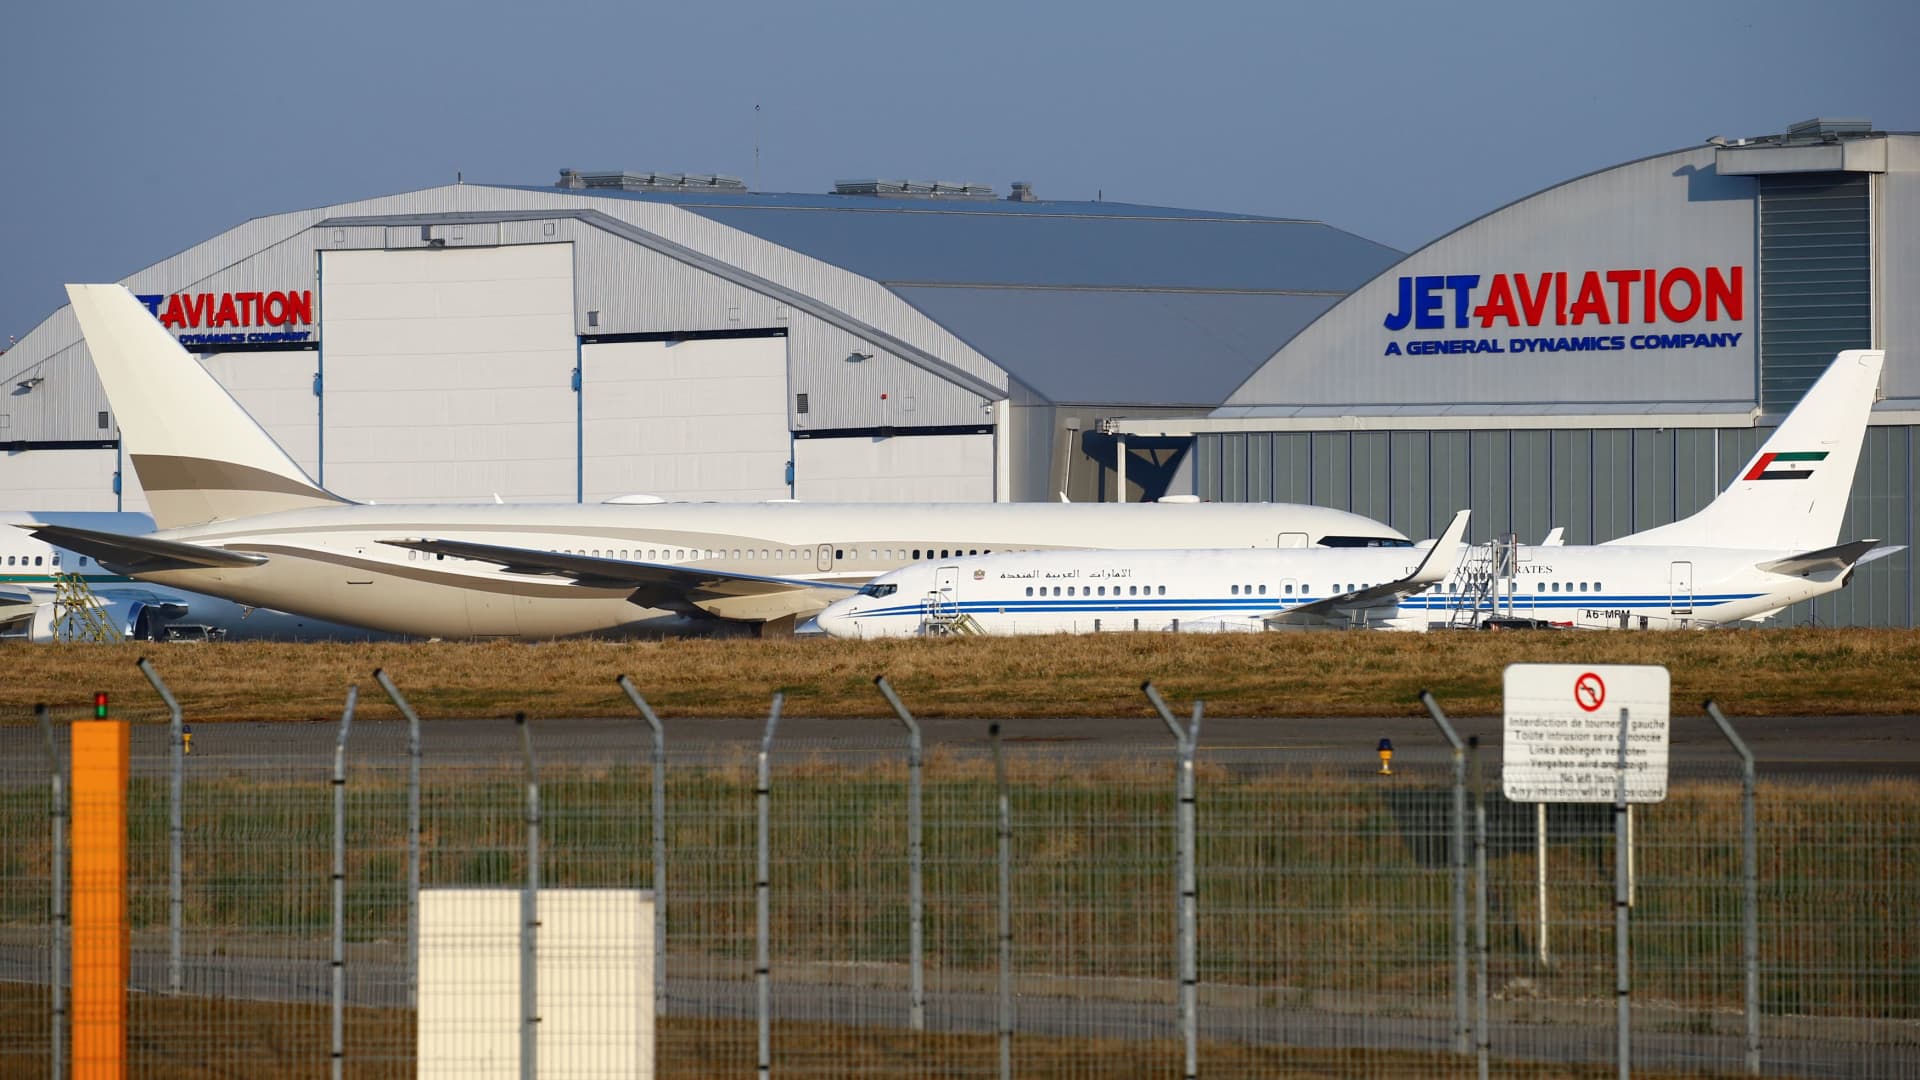 A plane, according to Swiss media reports believed to be used in the past by Russian billionaire Roman Abramovich, is pictured on the grounds of EuroAirport Basel Mulhouse Freiburg near Mulhouse, France, March 9, 2022.